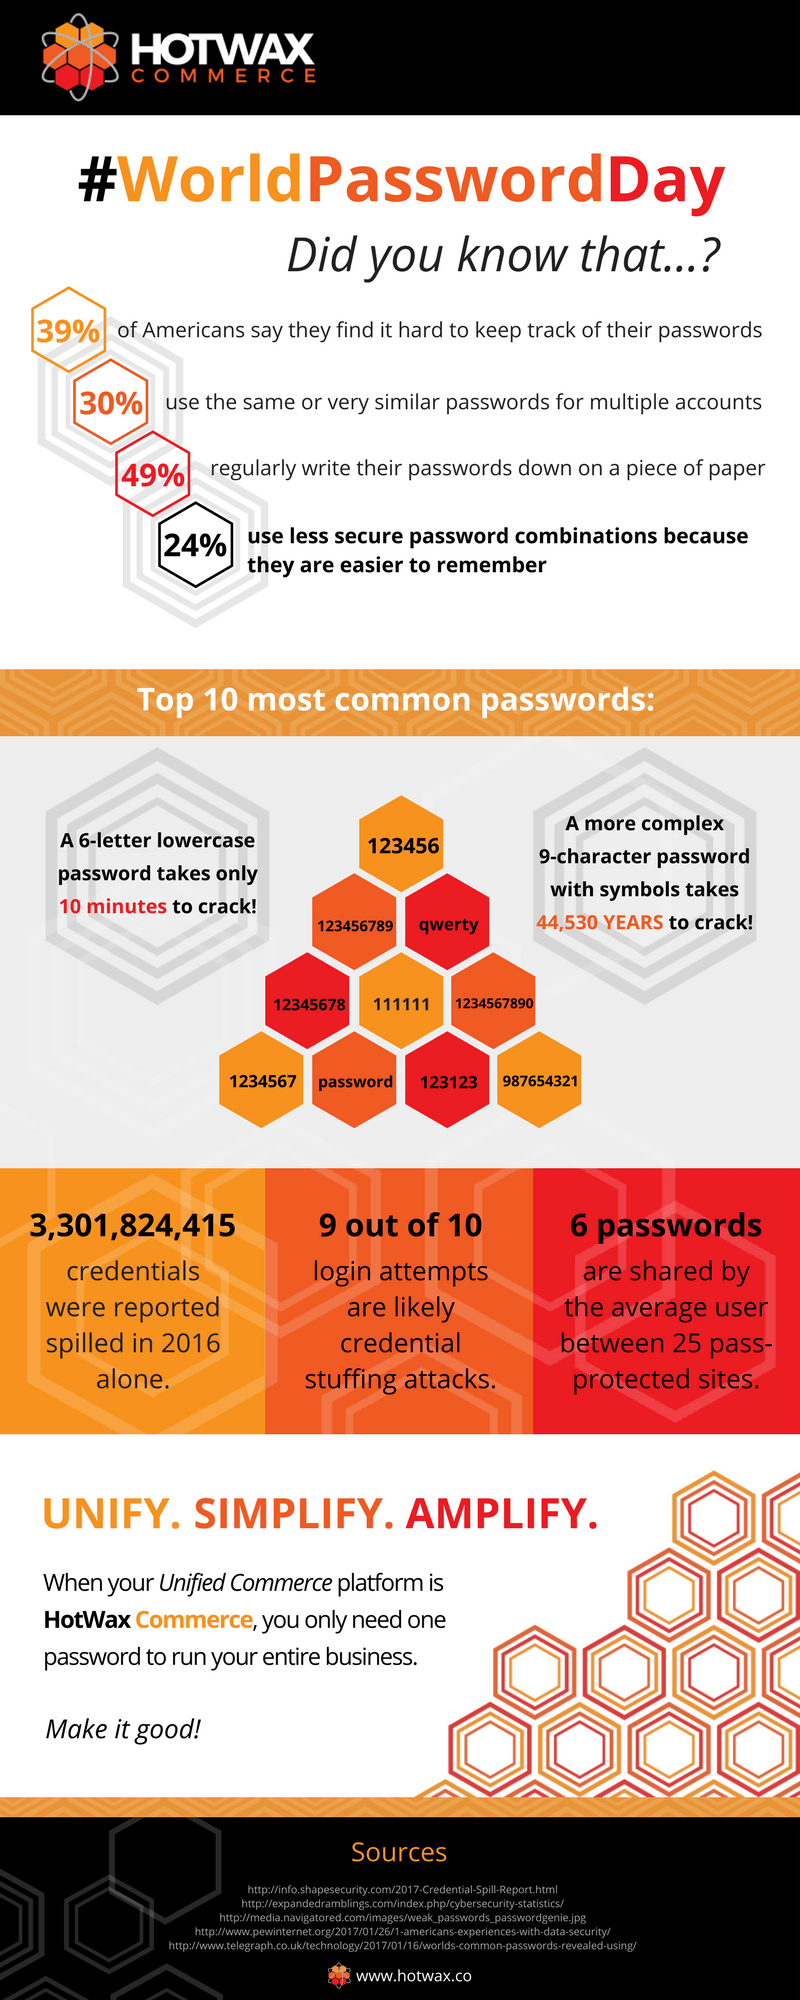 #WorldPasswordDay is when HotWax Commerce celebrates the chance to have one, truly magnificent and strong password for the 10 business software modules is offers. 